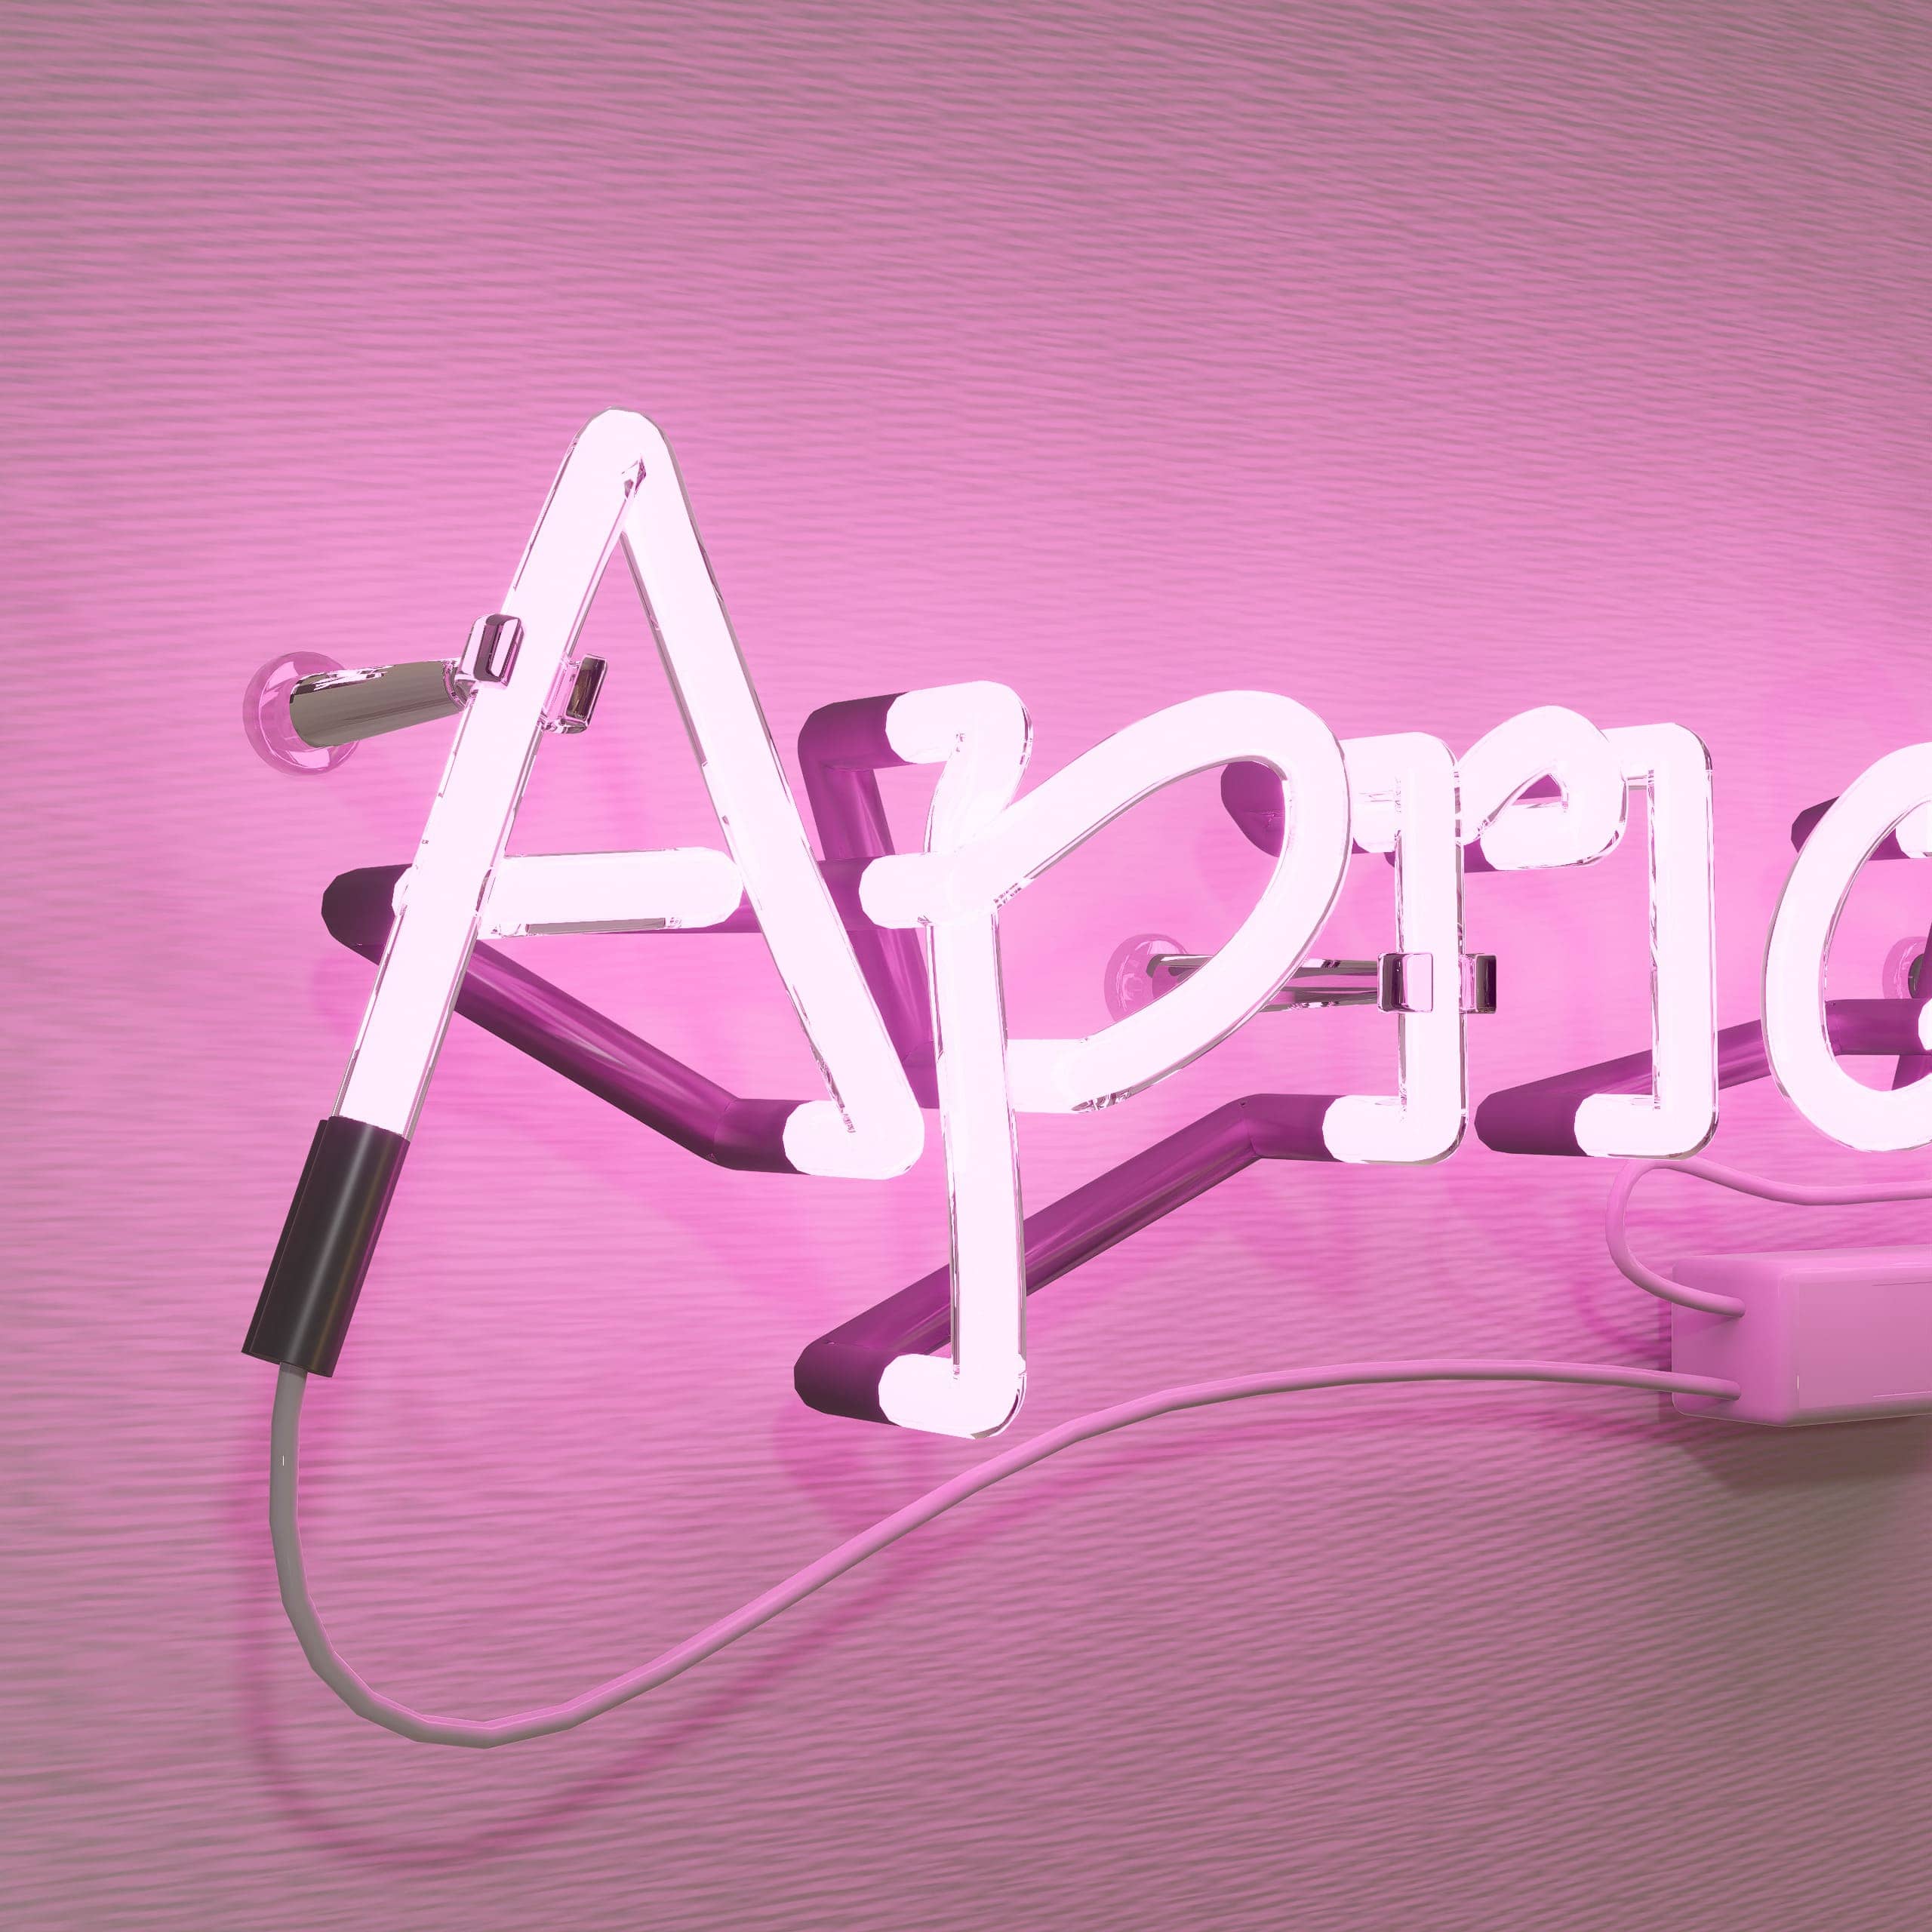 vintage-neon-signs-inspire-'apricity'